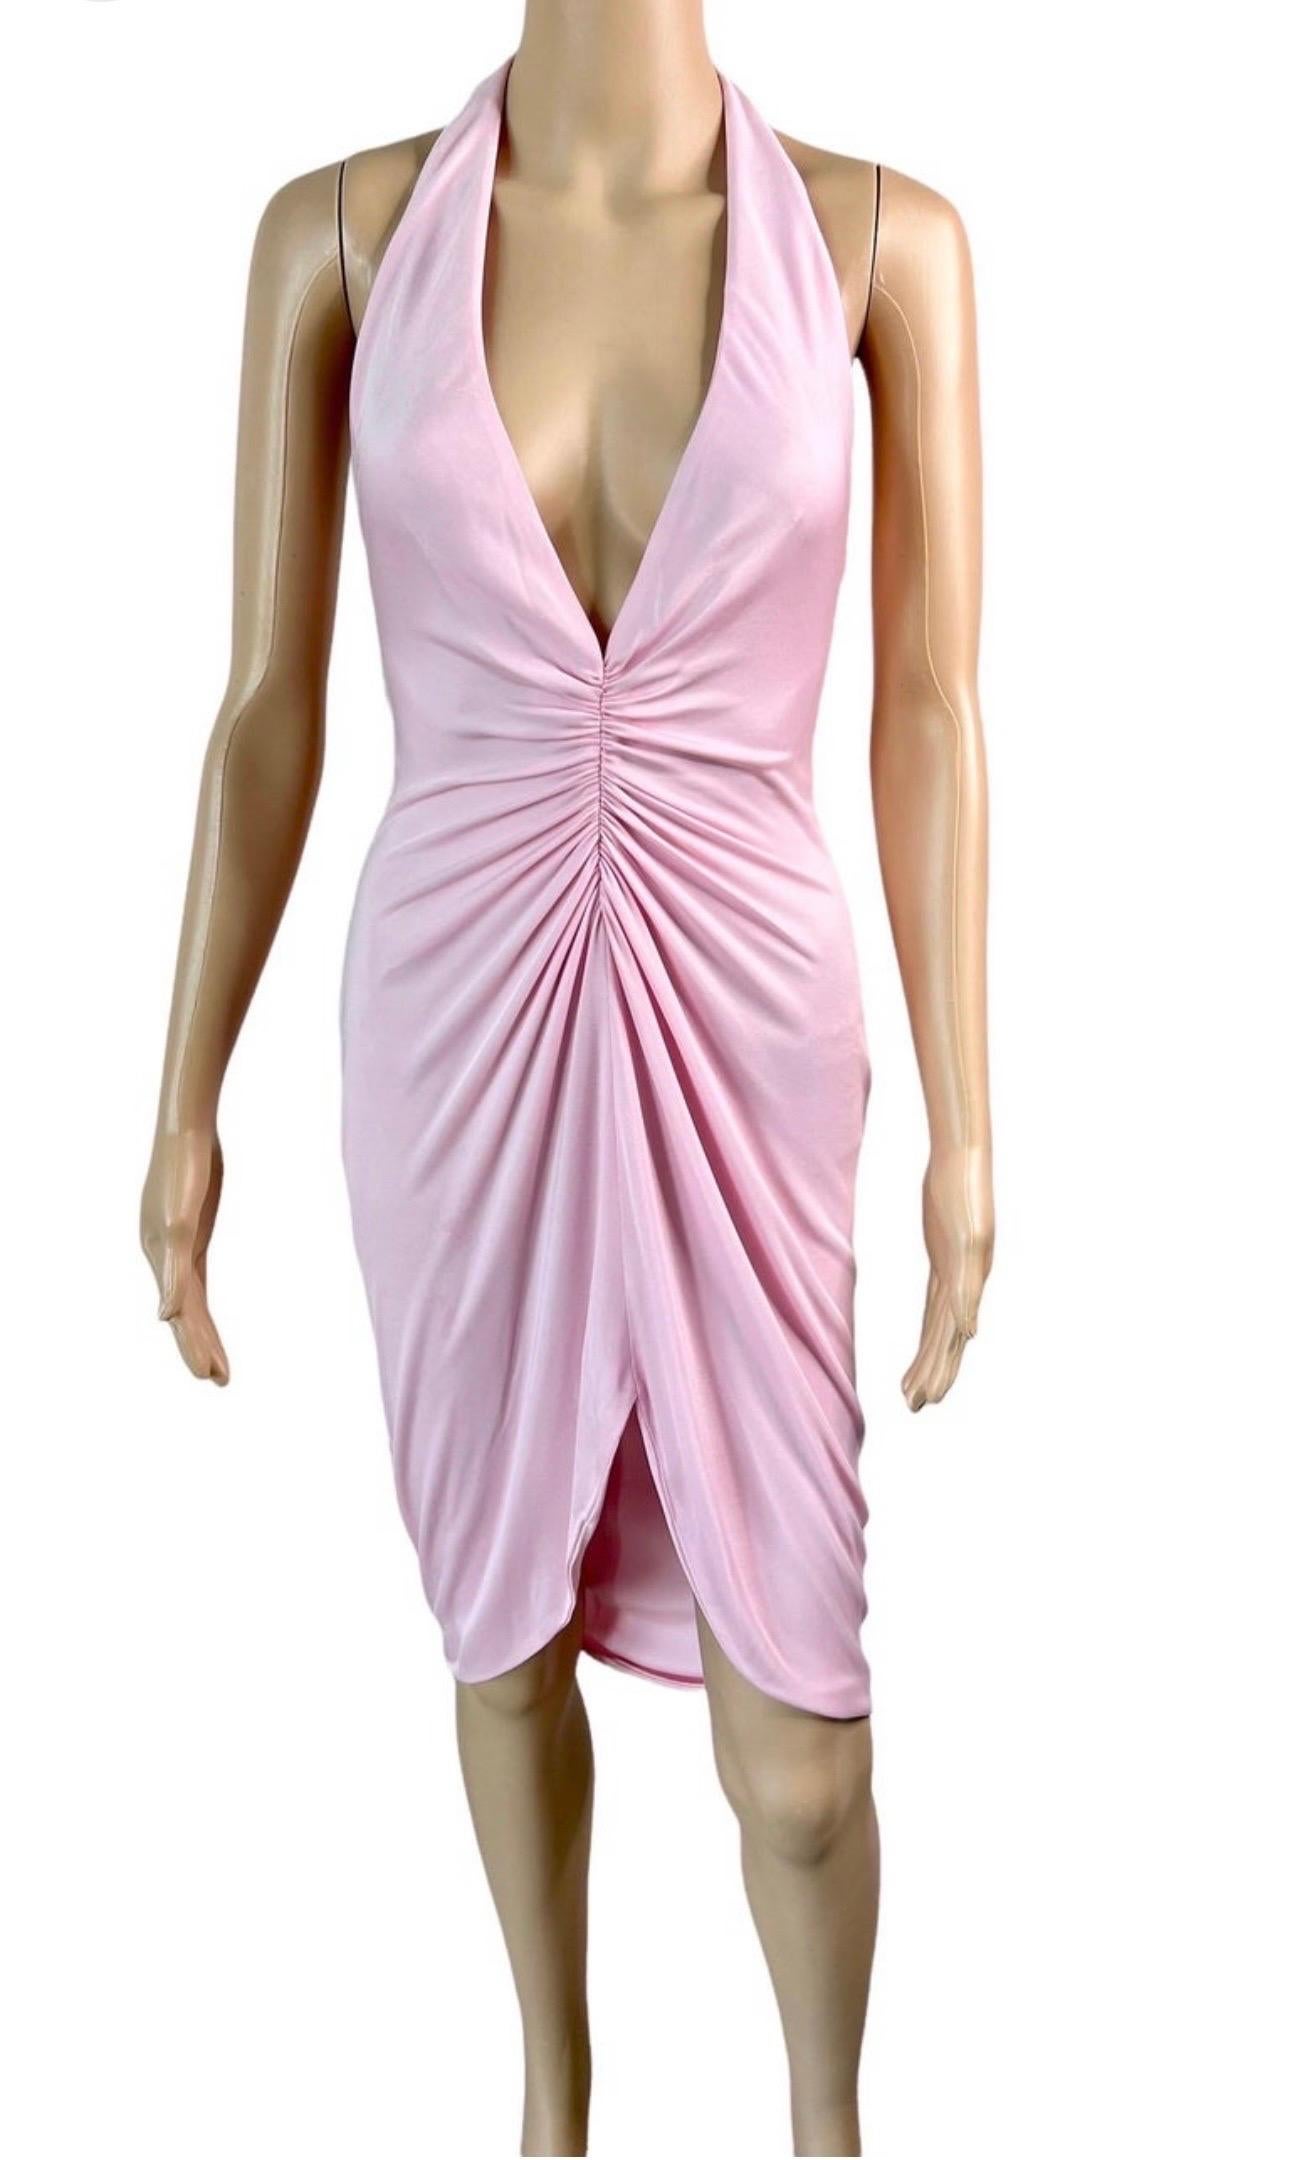 Versace S/S 2005 Runway Plunging Hi-Low Ruched Open Back Pink Dress IT 40

Look 1 from the Spring 2005 Collection.

As seen on Miley Cyrus from OpulentAddict and JLo